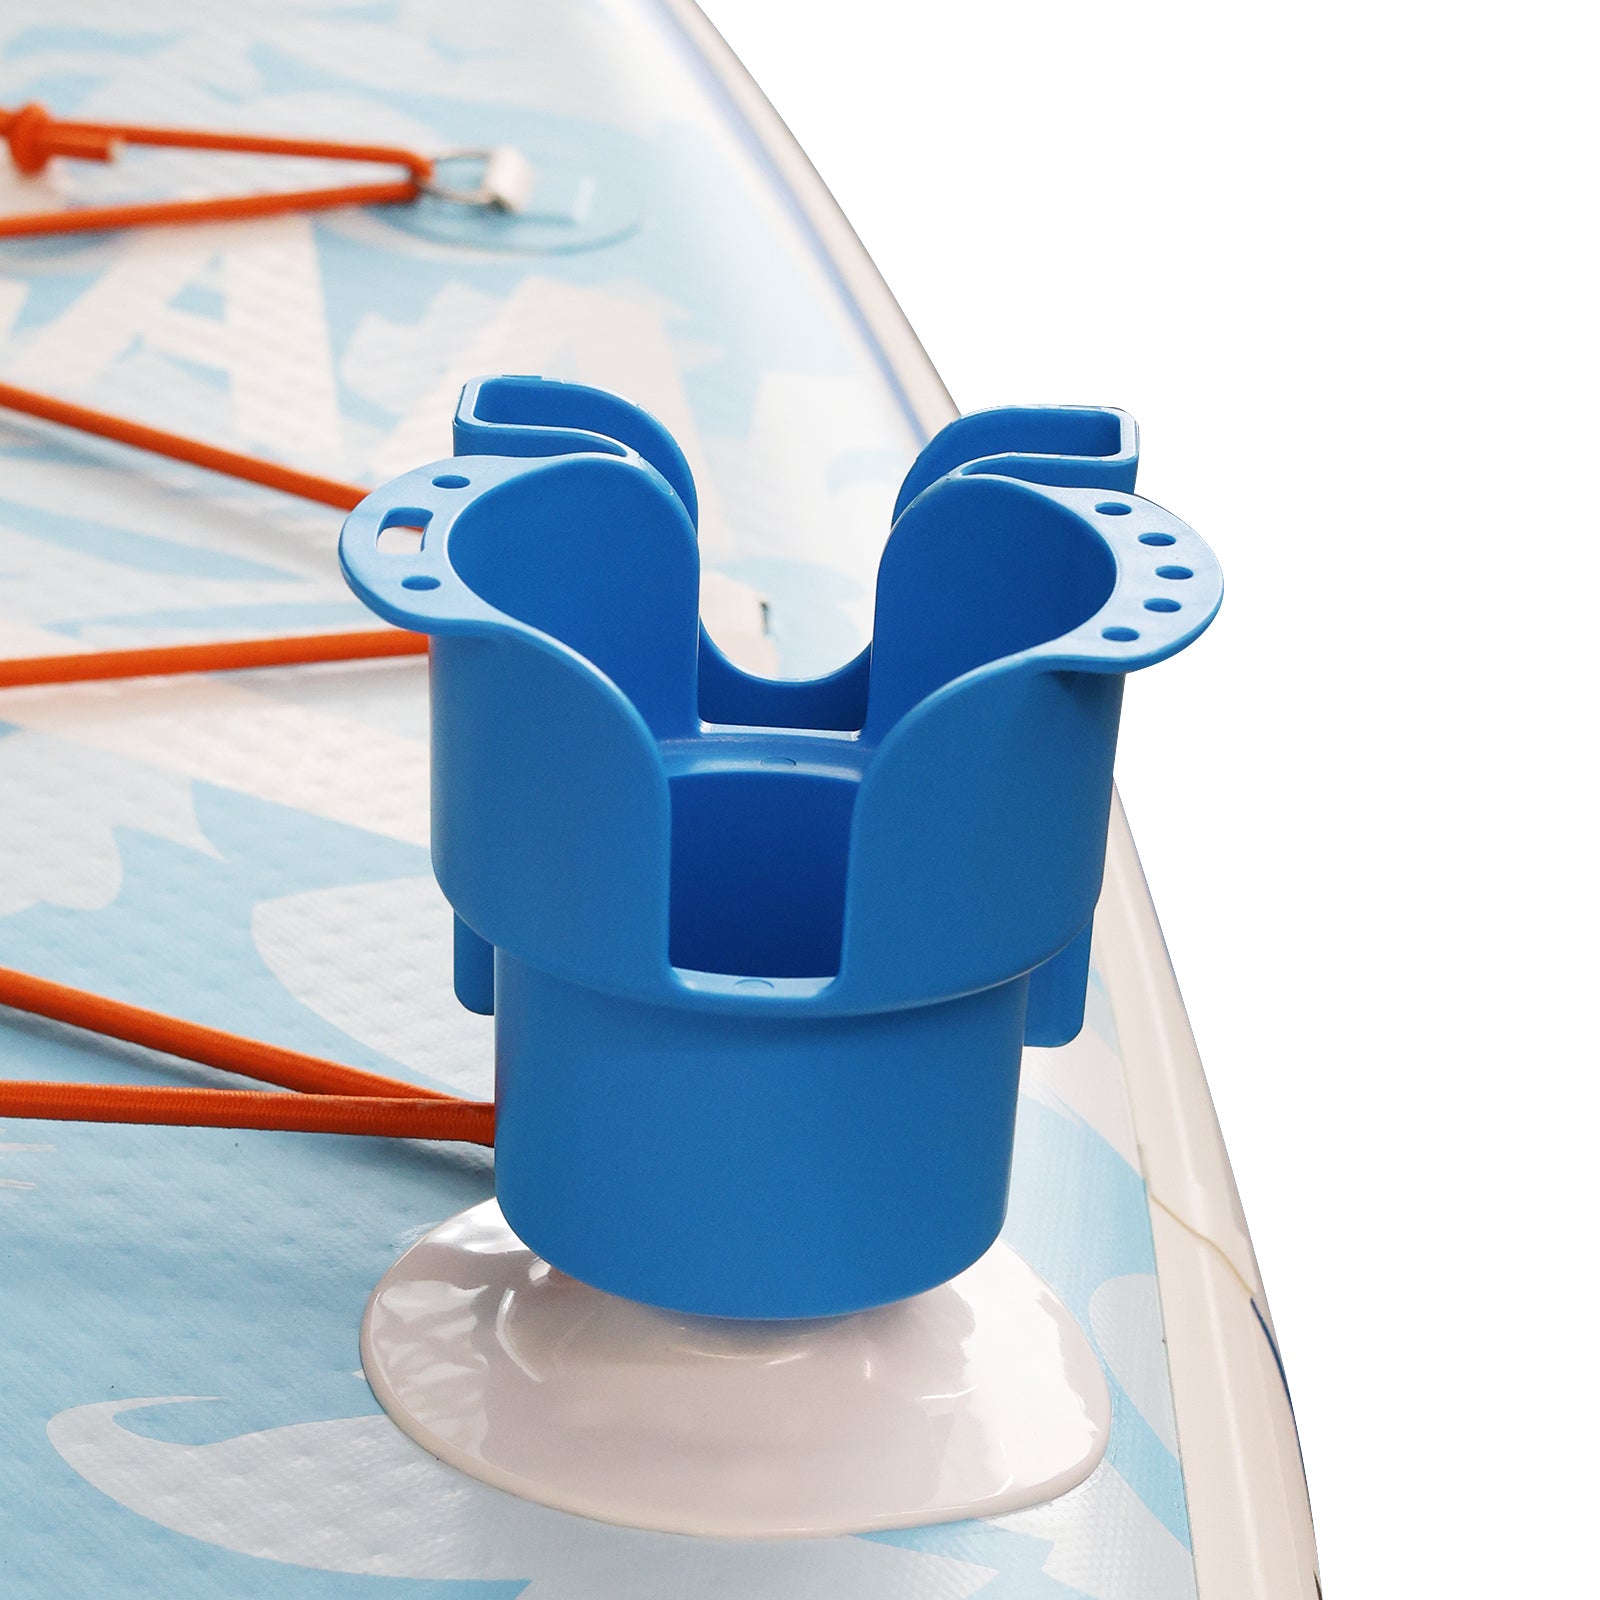 Cup Holder for Paddle Boards - Essential Accessory for a Relaxing Ride